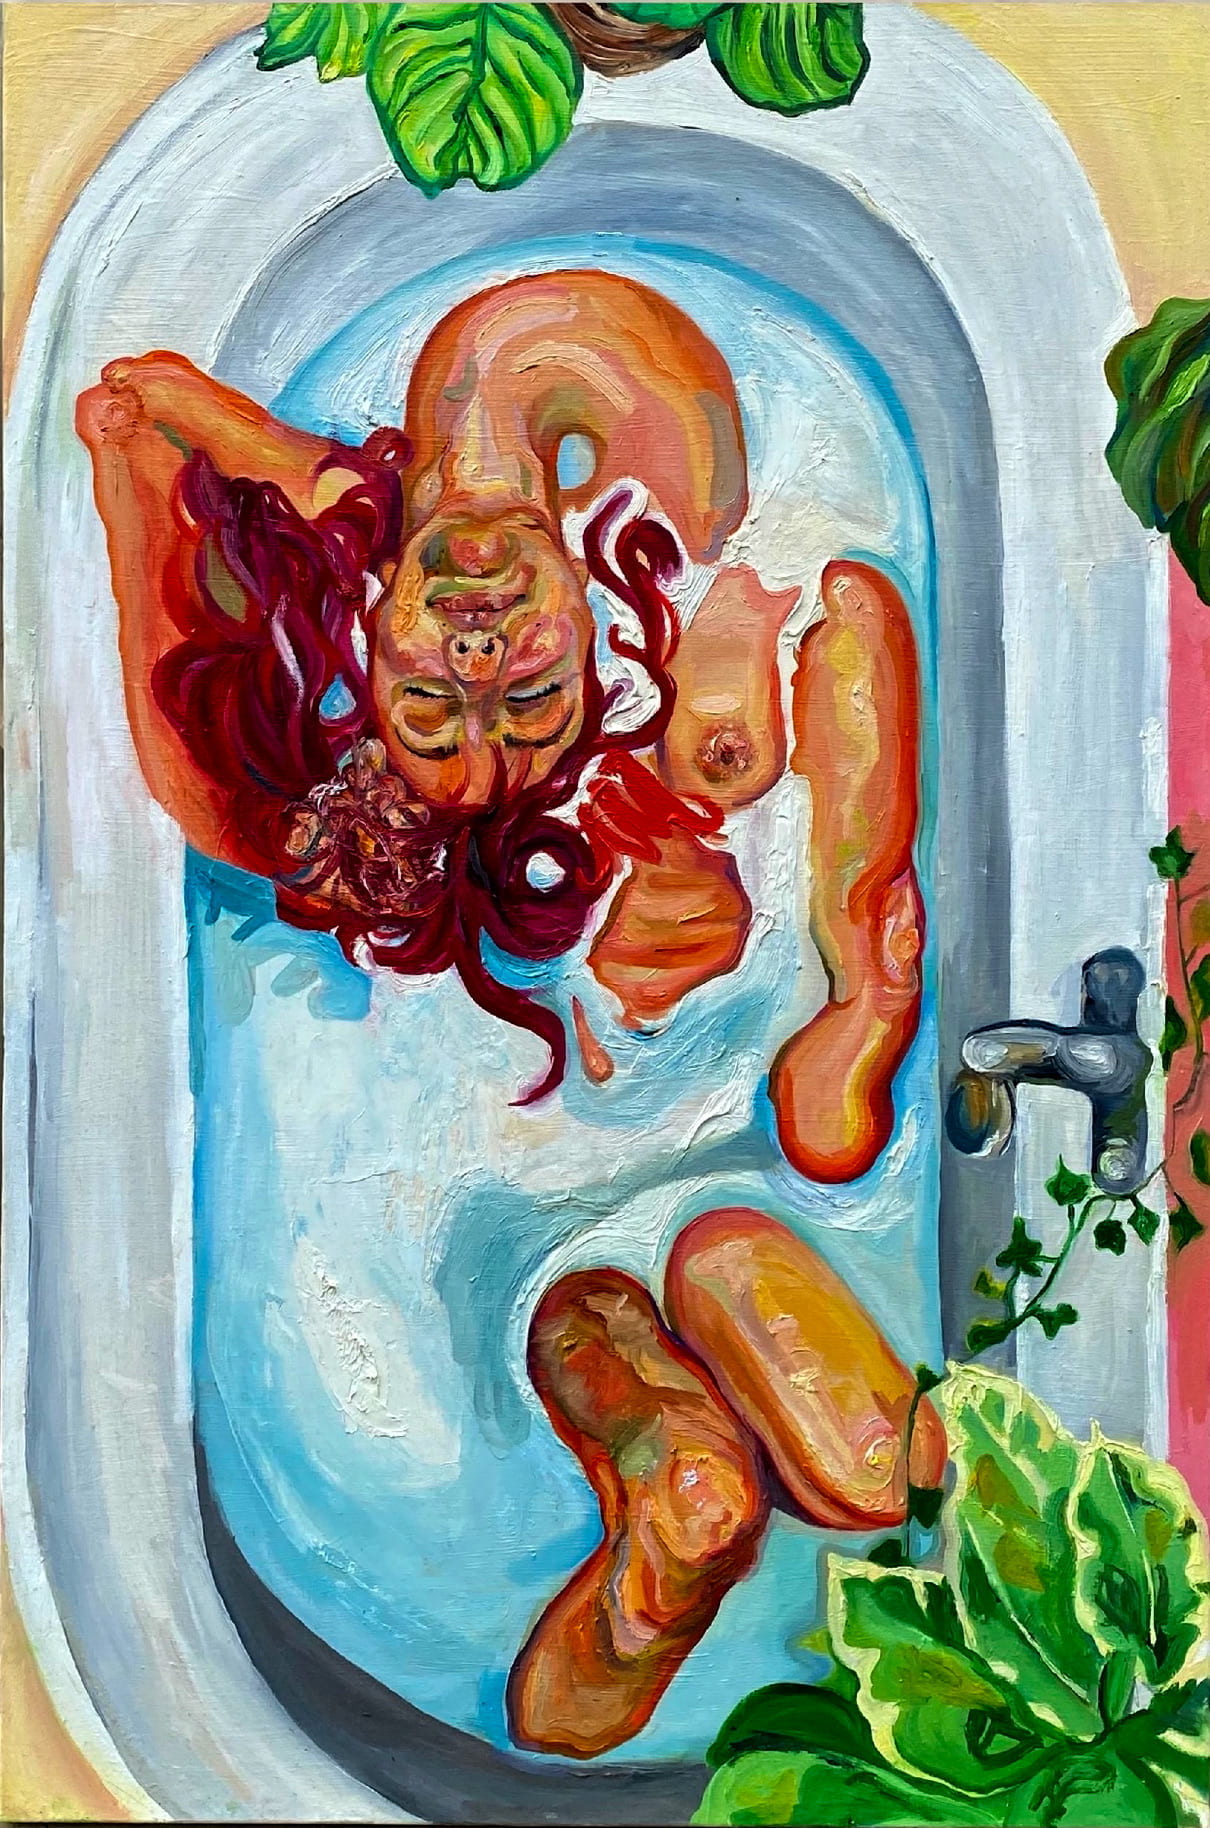 abstract painting of a female figure in a bath